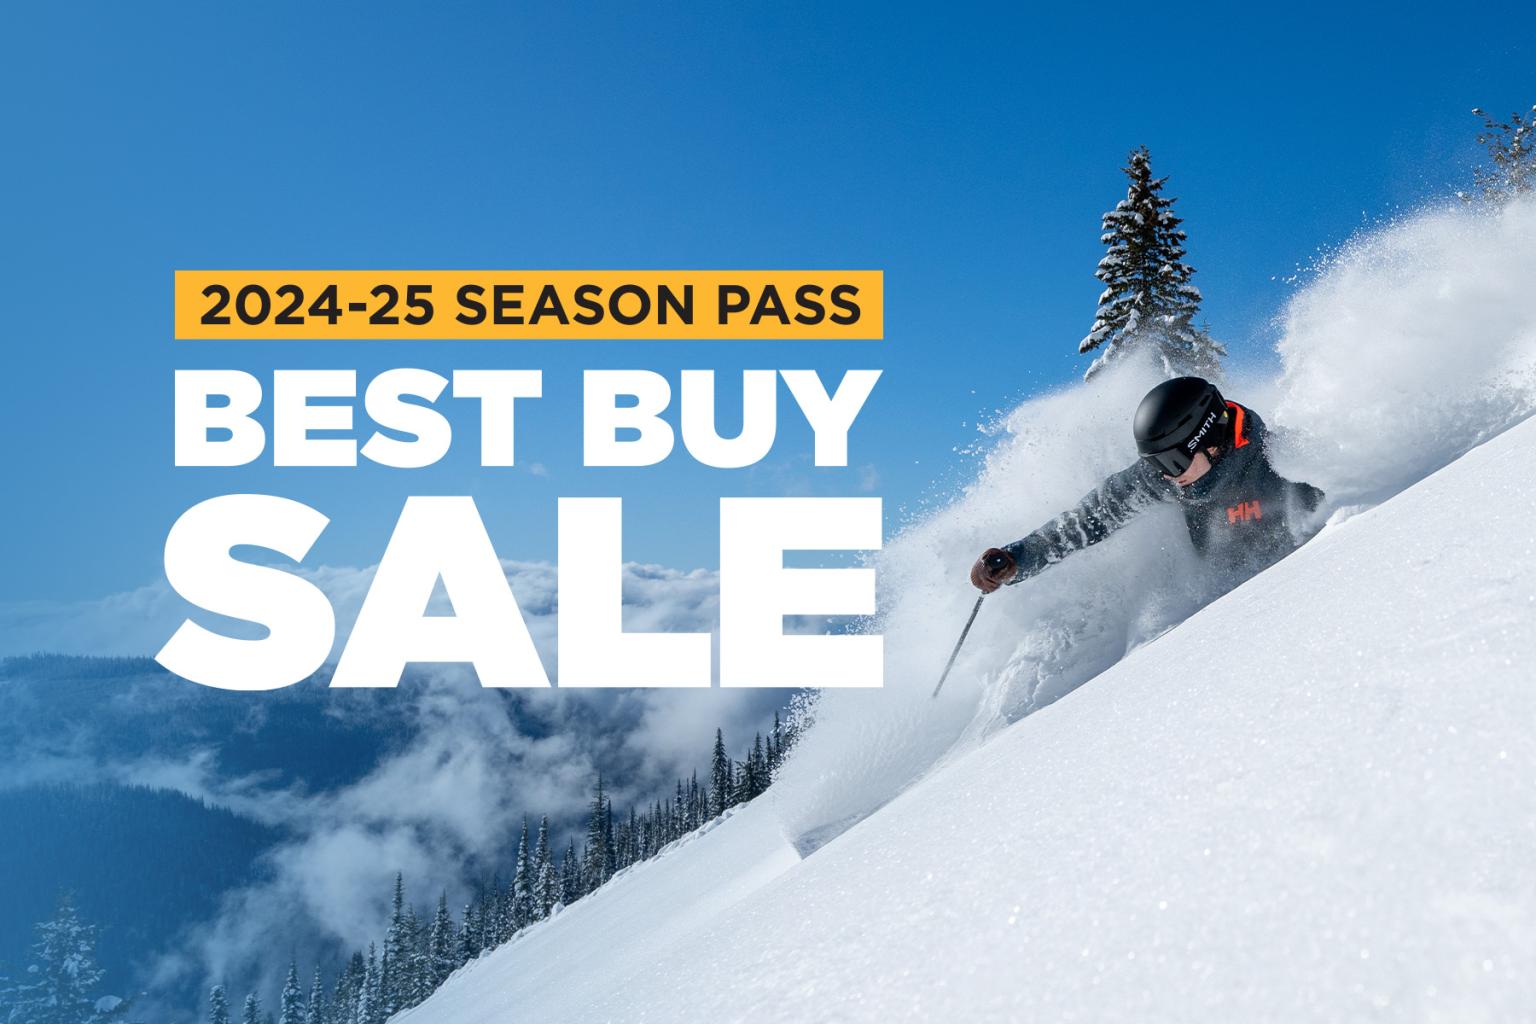 A skier riding in powder with trees and mountains in the background and 'Best Buy' messaging on the picture